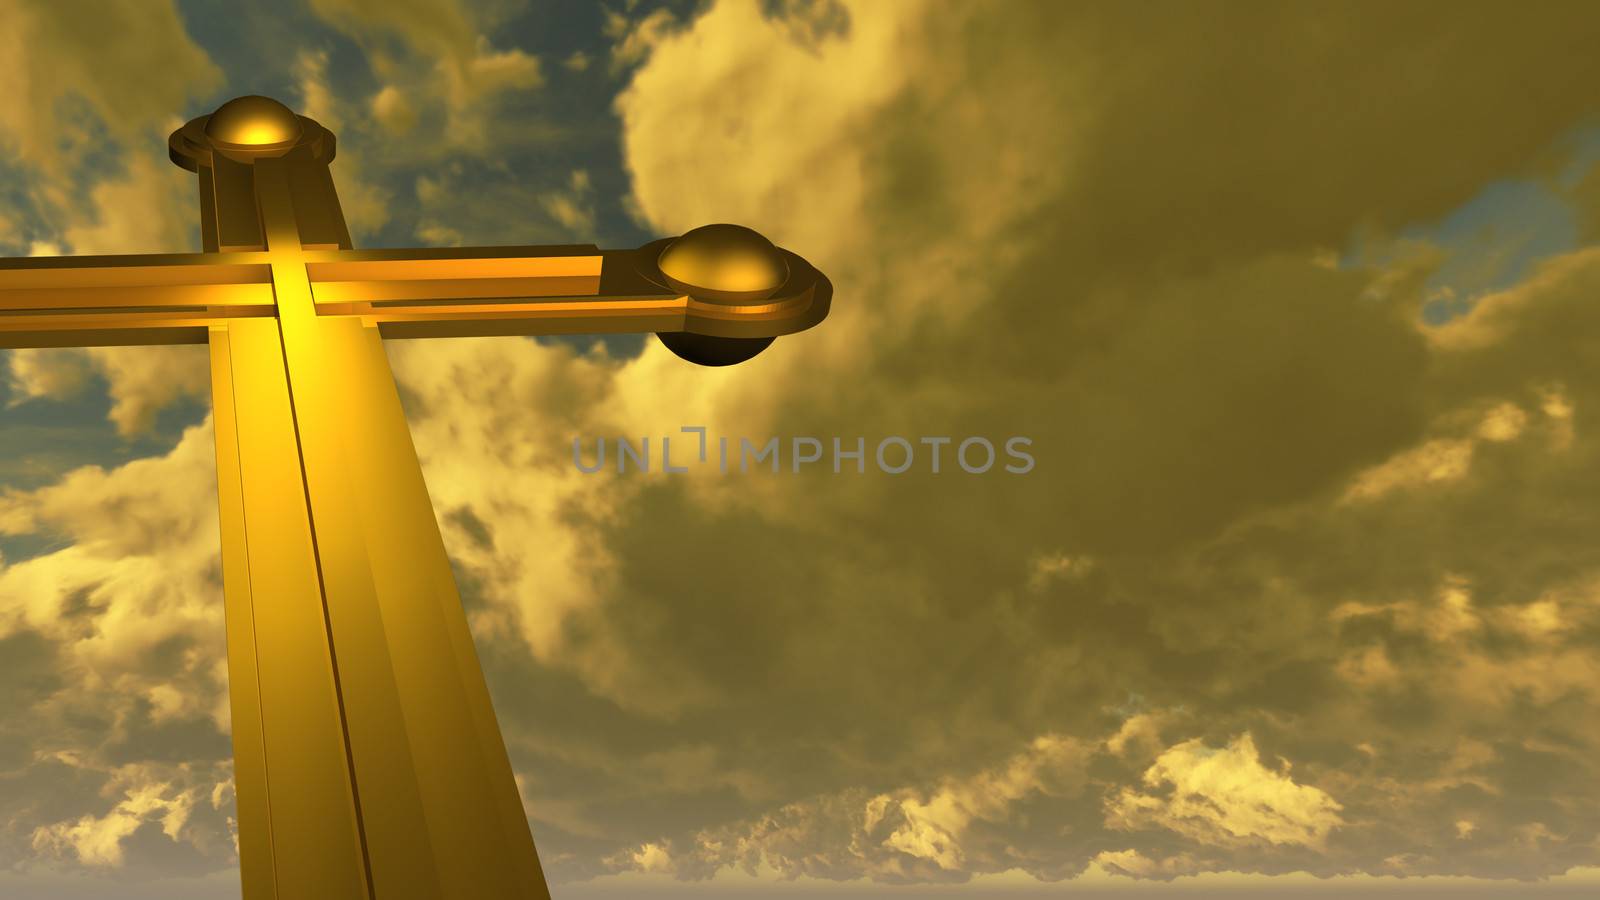 Cross made from gold made in 3d software